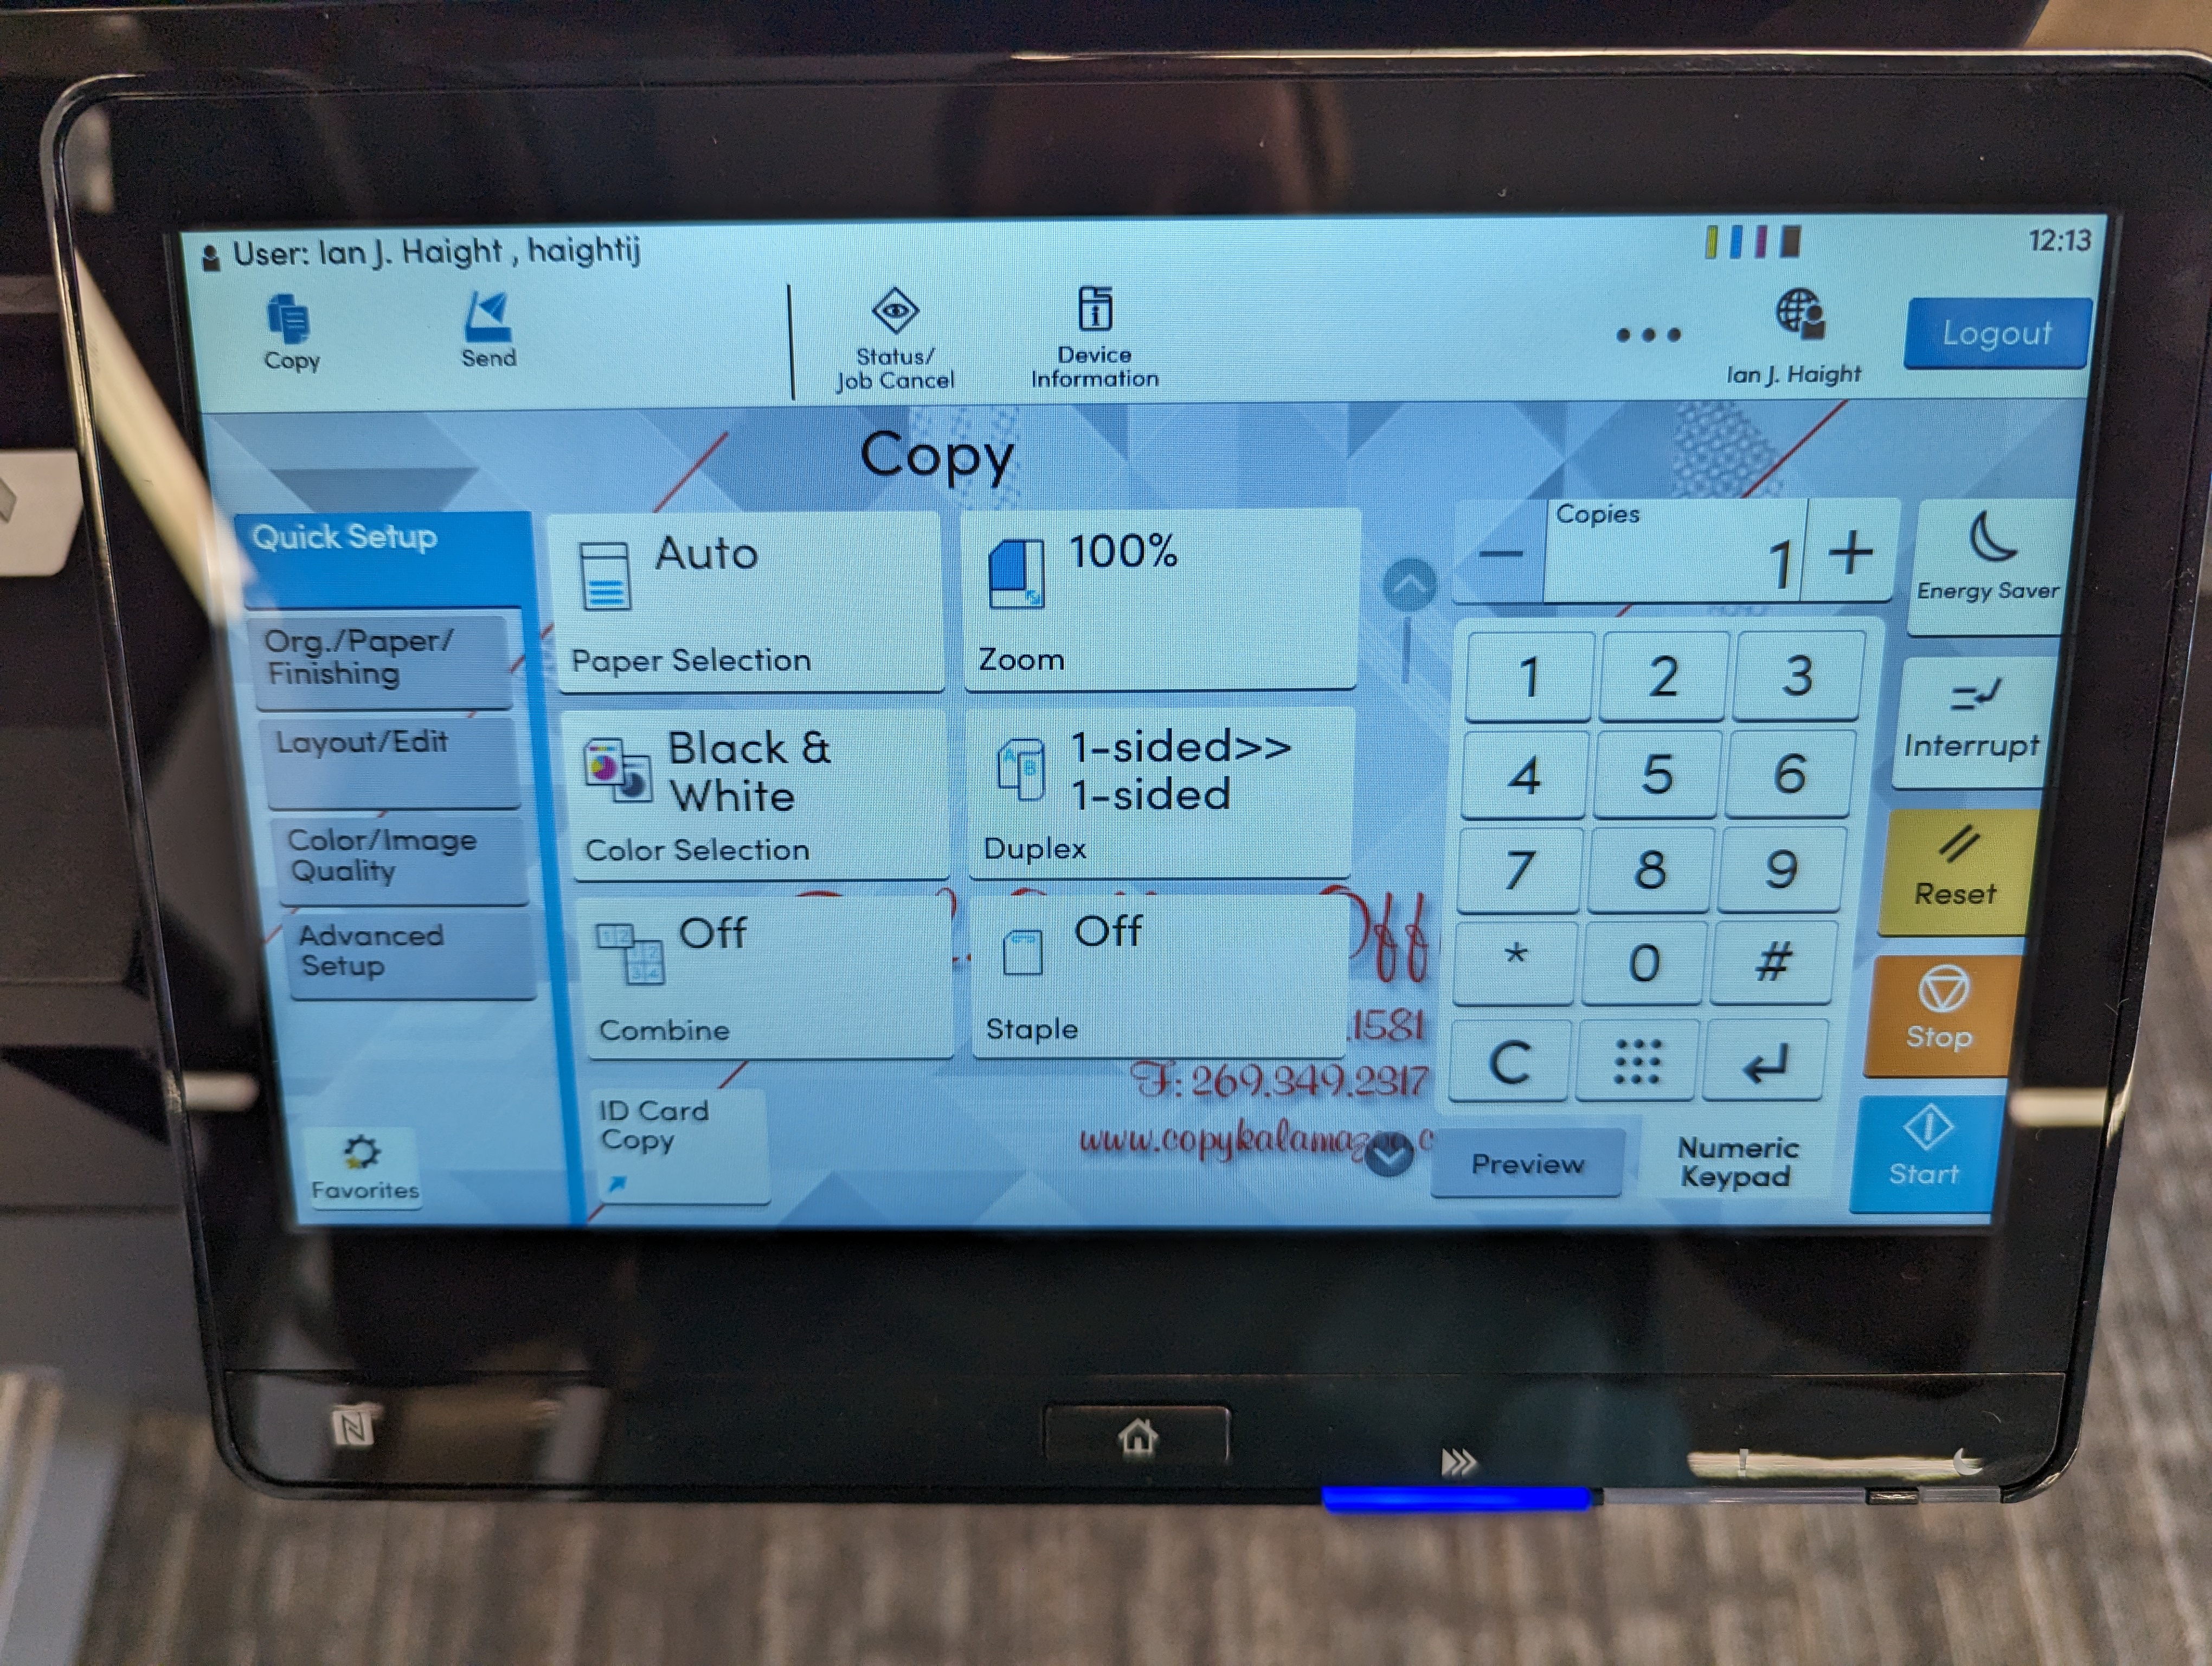 To make copies, touch the "Device Functions" button which will display all of the copying options.